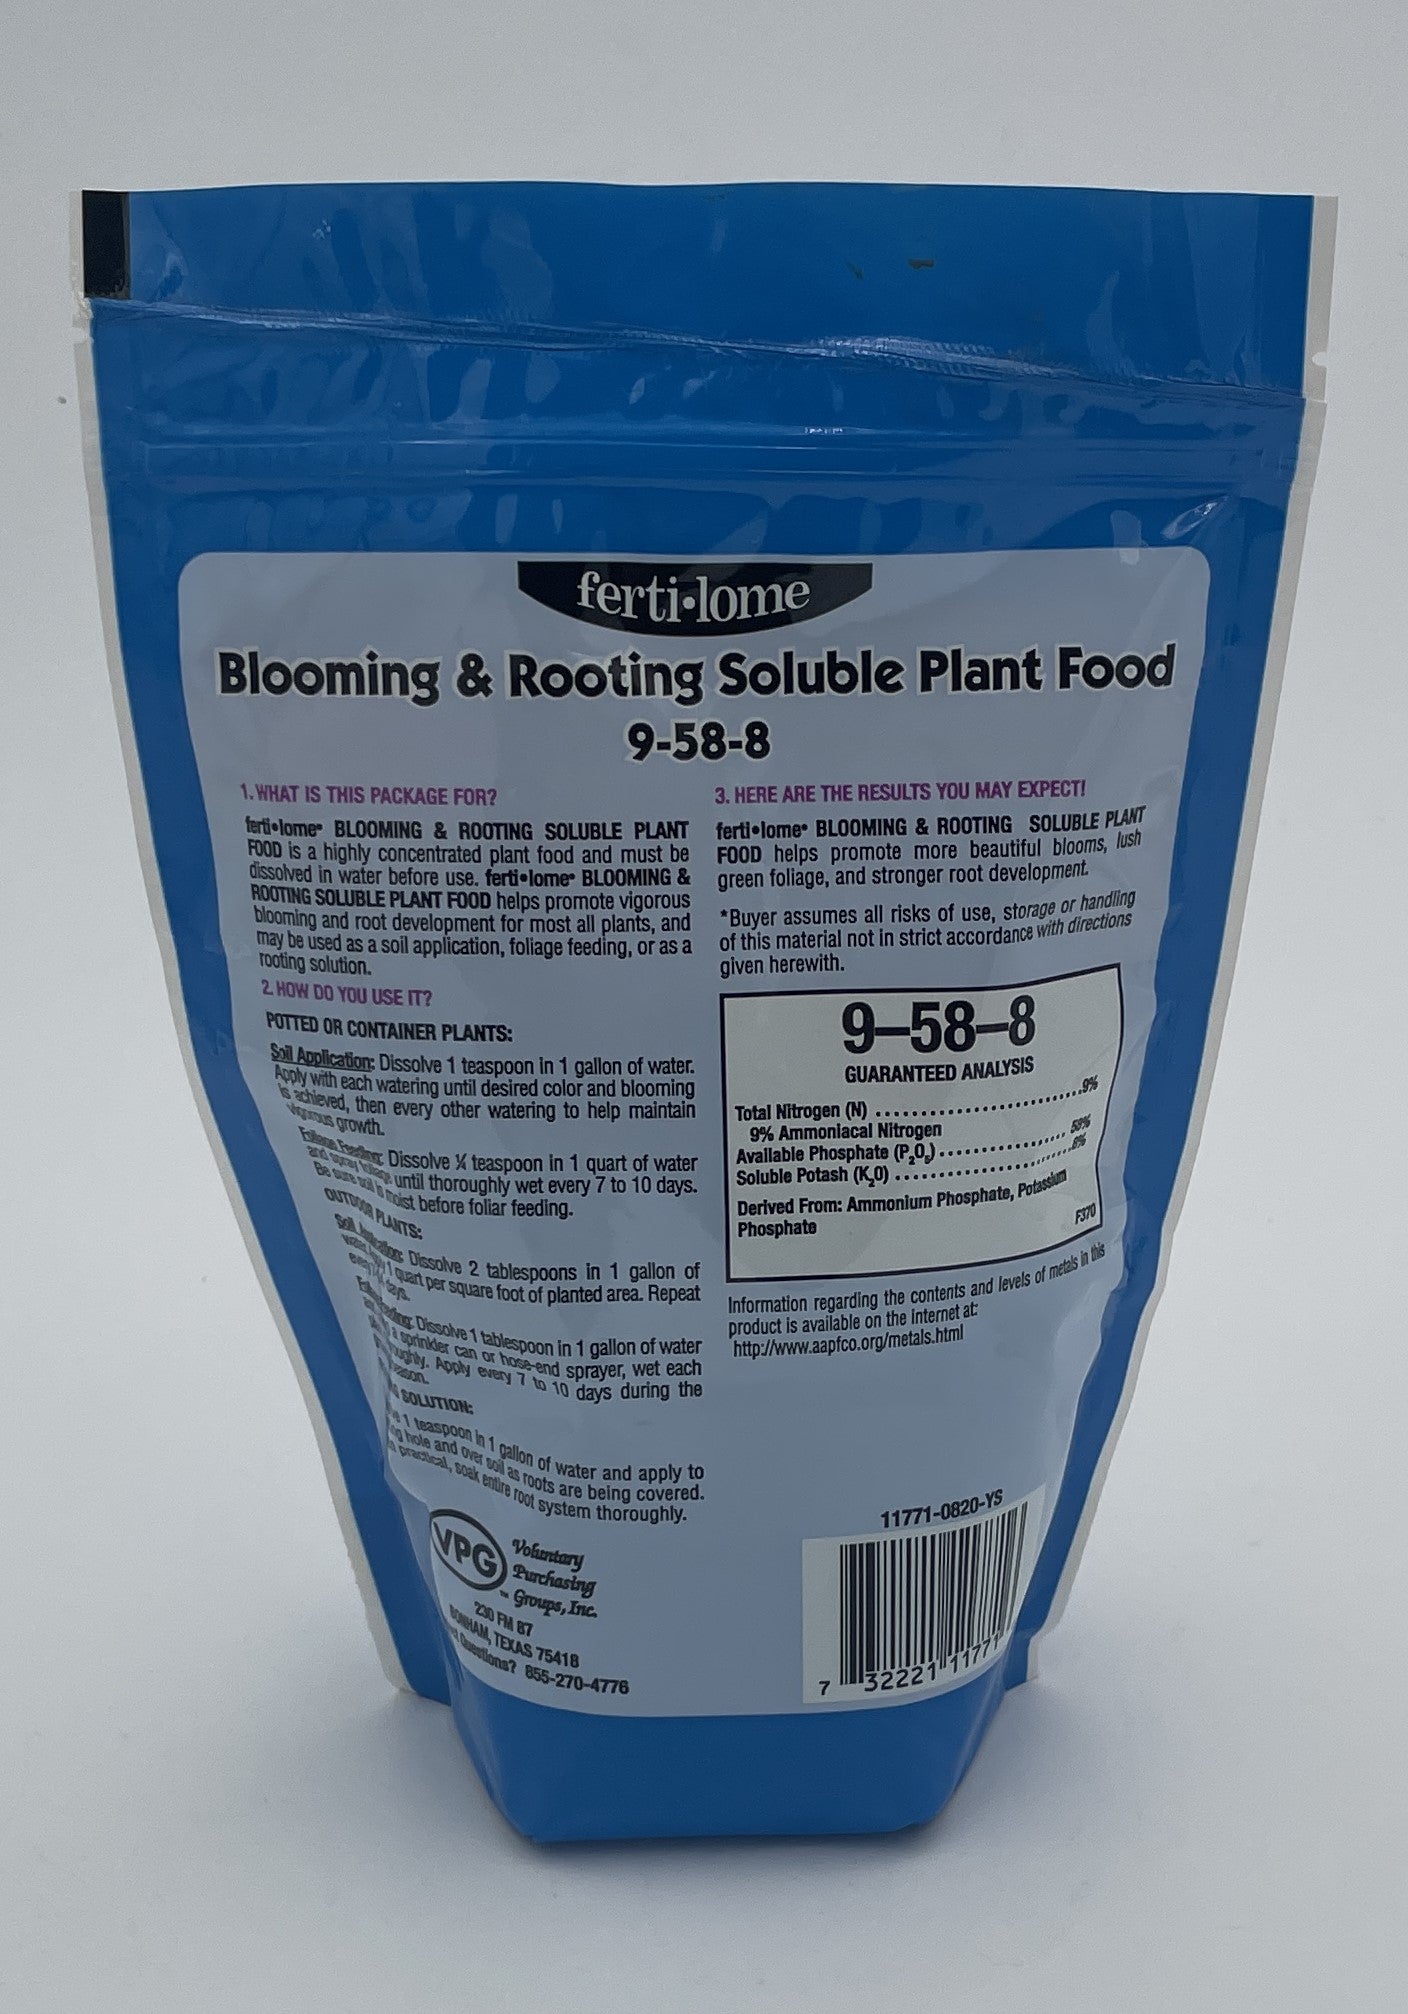 Fertilome Blooming & Rooting Water Soluble Plant Food 1.5lbs